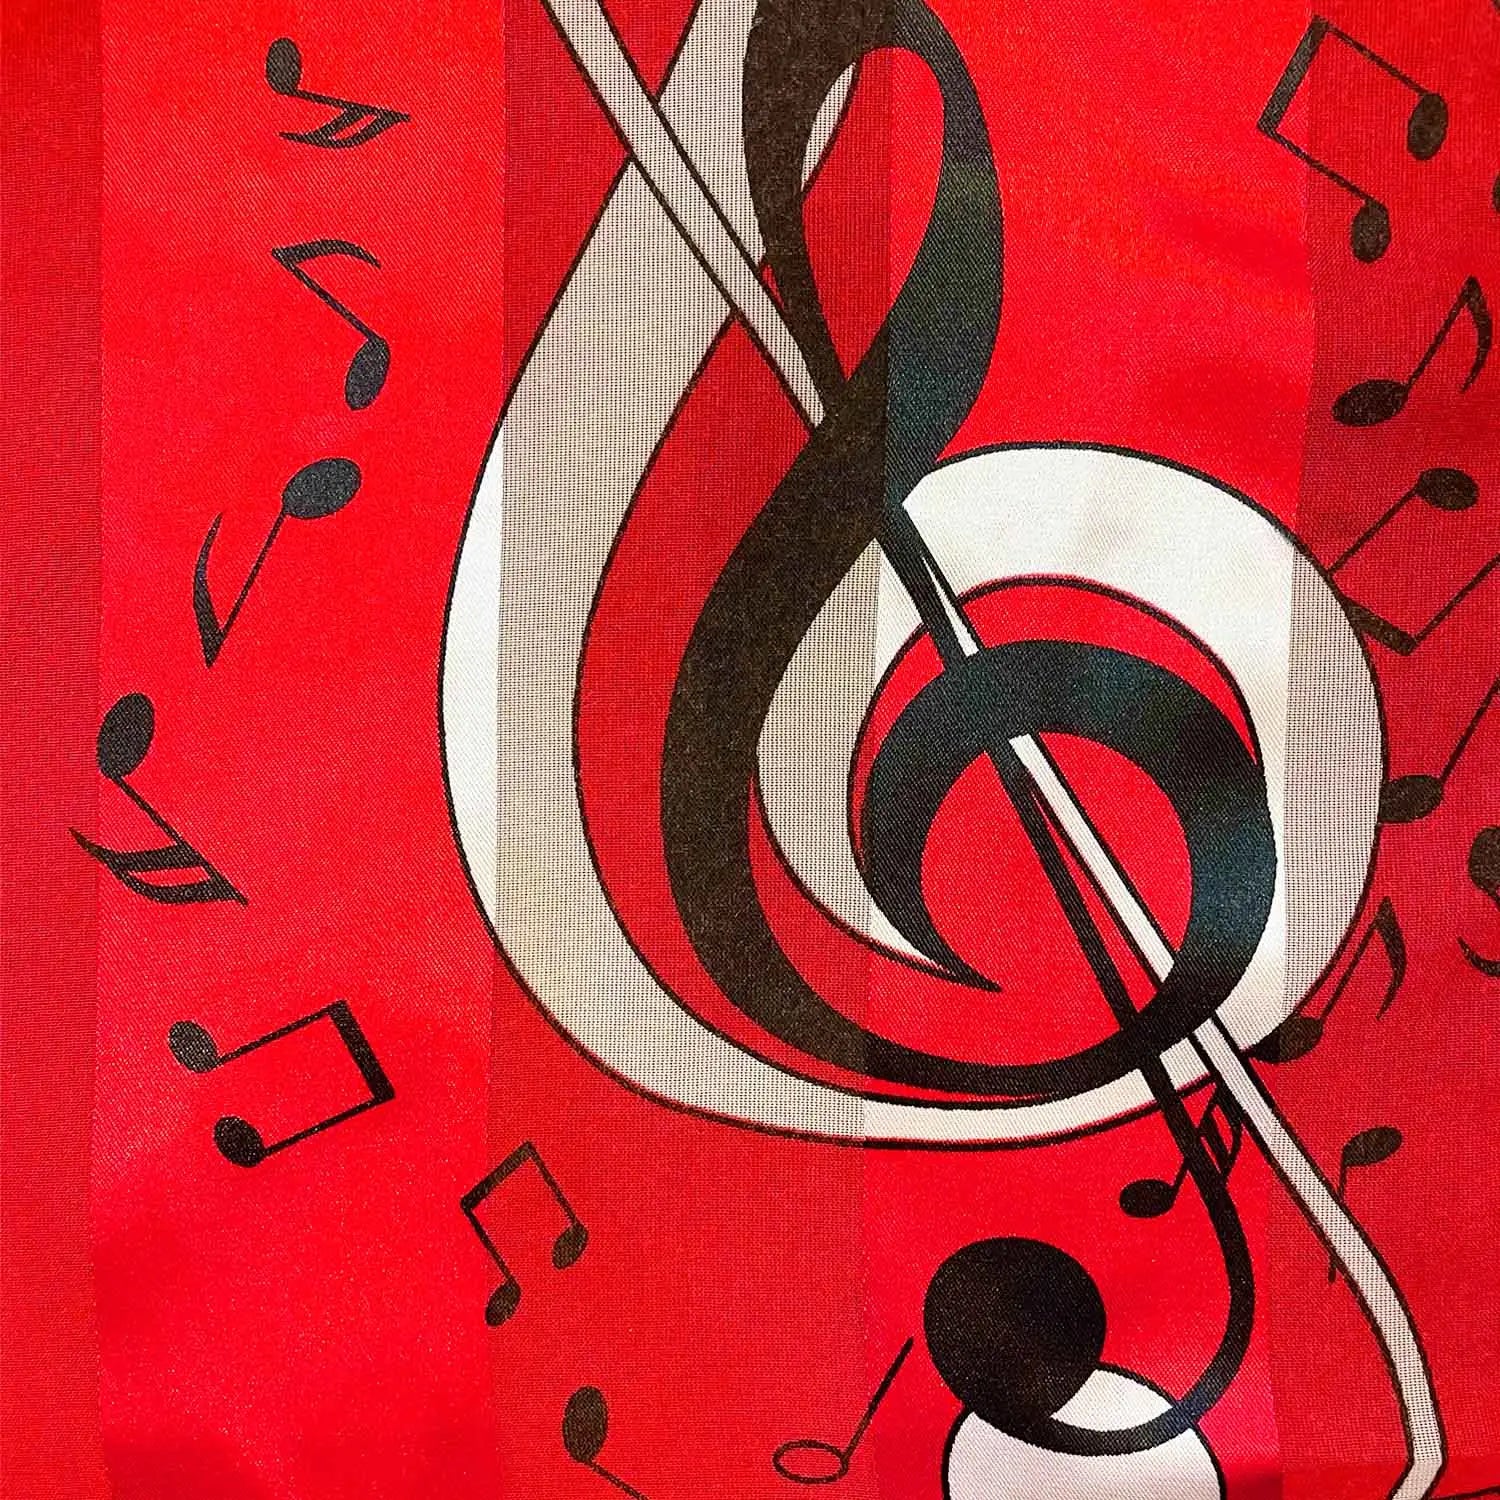 Red background with treble and music notes on Music Satin Scarf for Unisex Piano Clef Print.